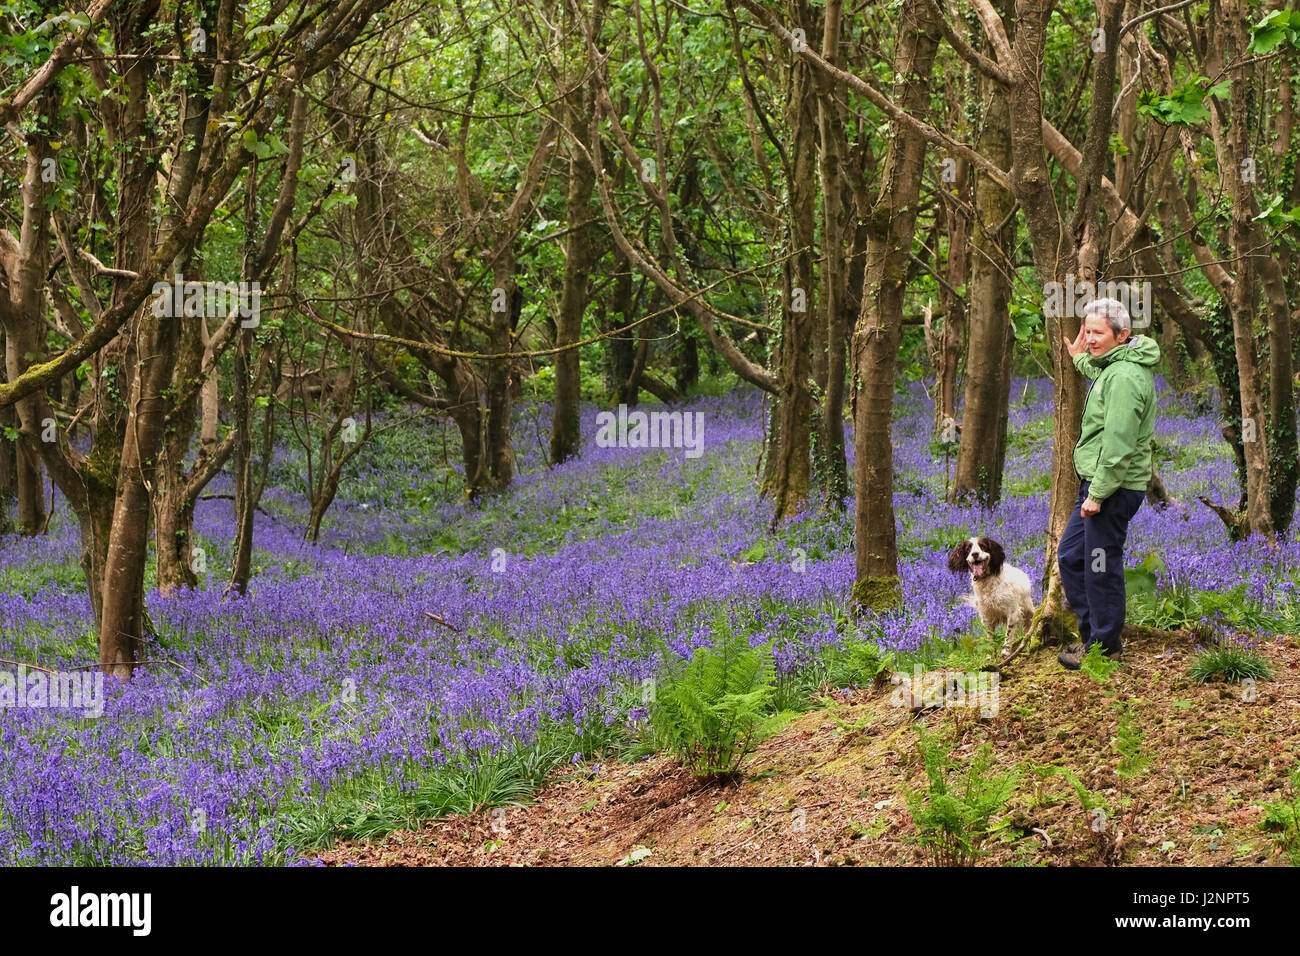 Eype, Dorset, UK. 30 April 2017.  A dog walker enjoys  a footpath through stunning bluebell woods in West Dorset despite rain and a drop in temperature. Credit: Tom Corban/Alamy Live News Stock Photo